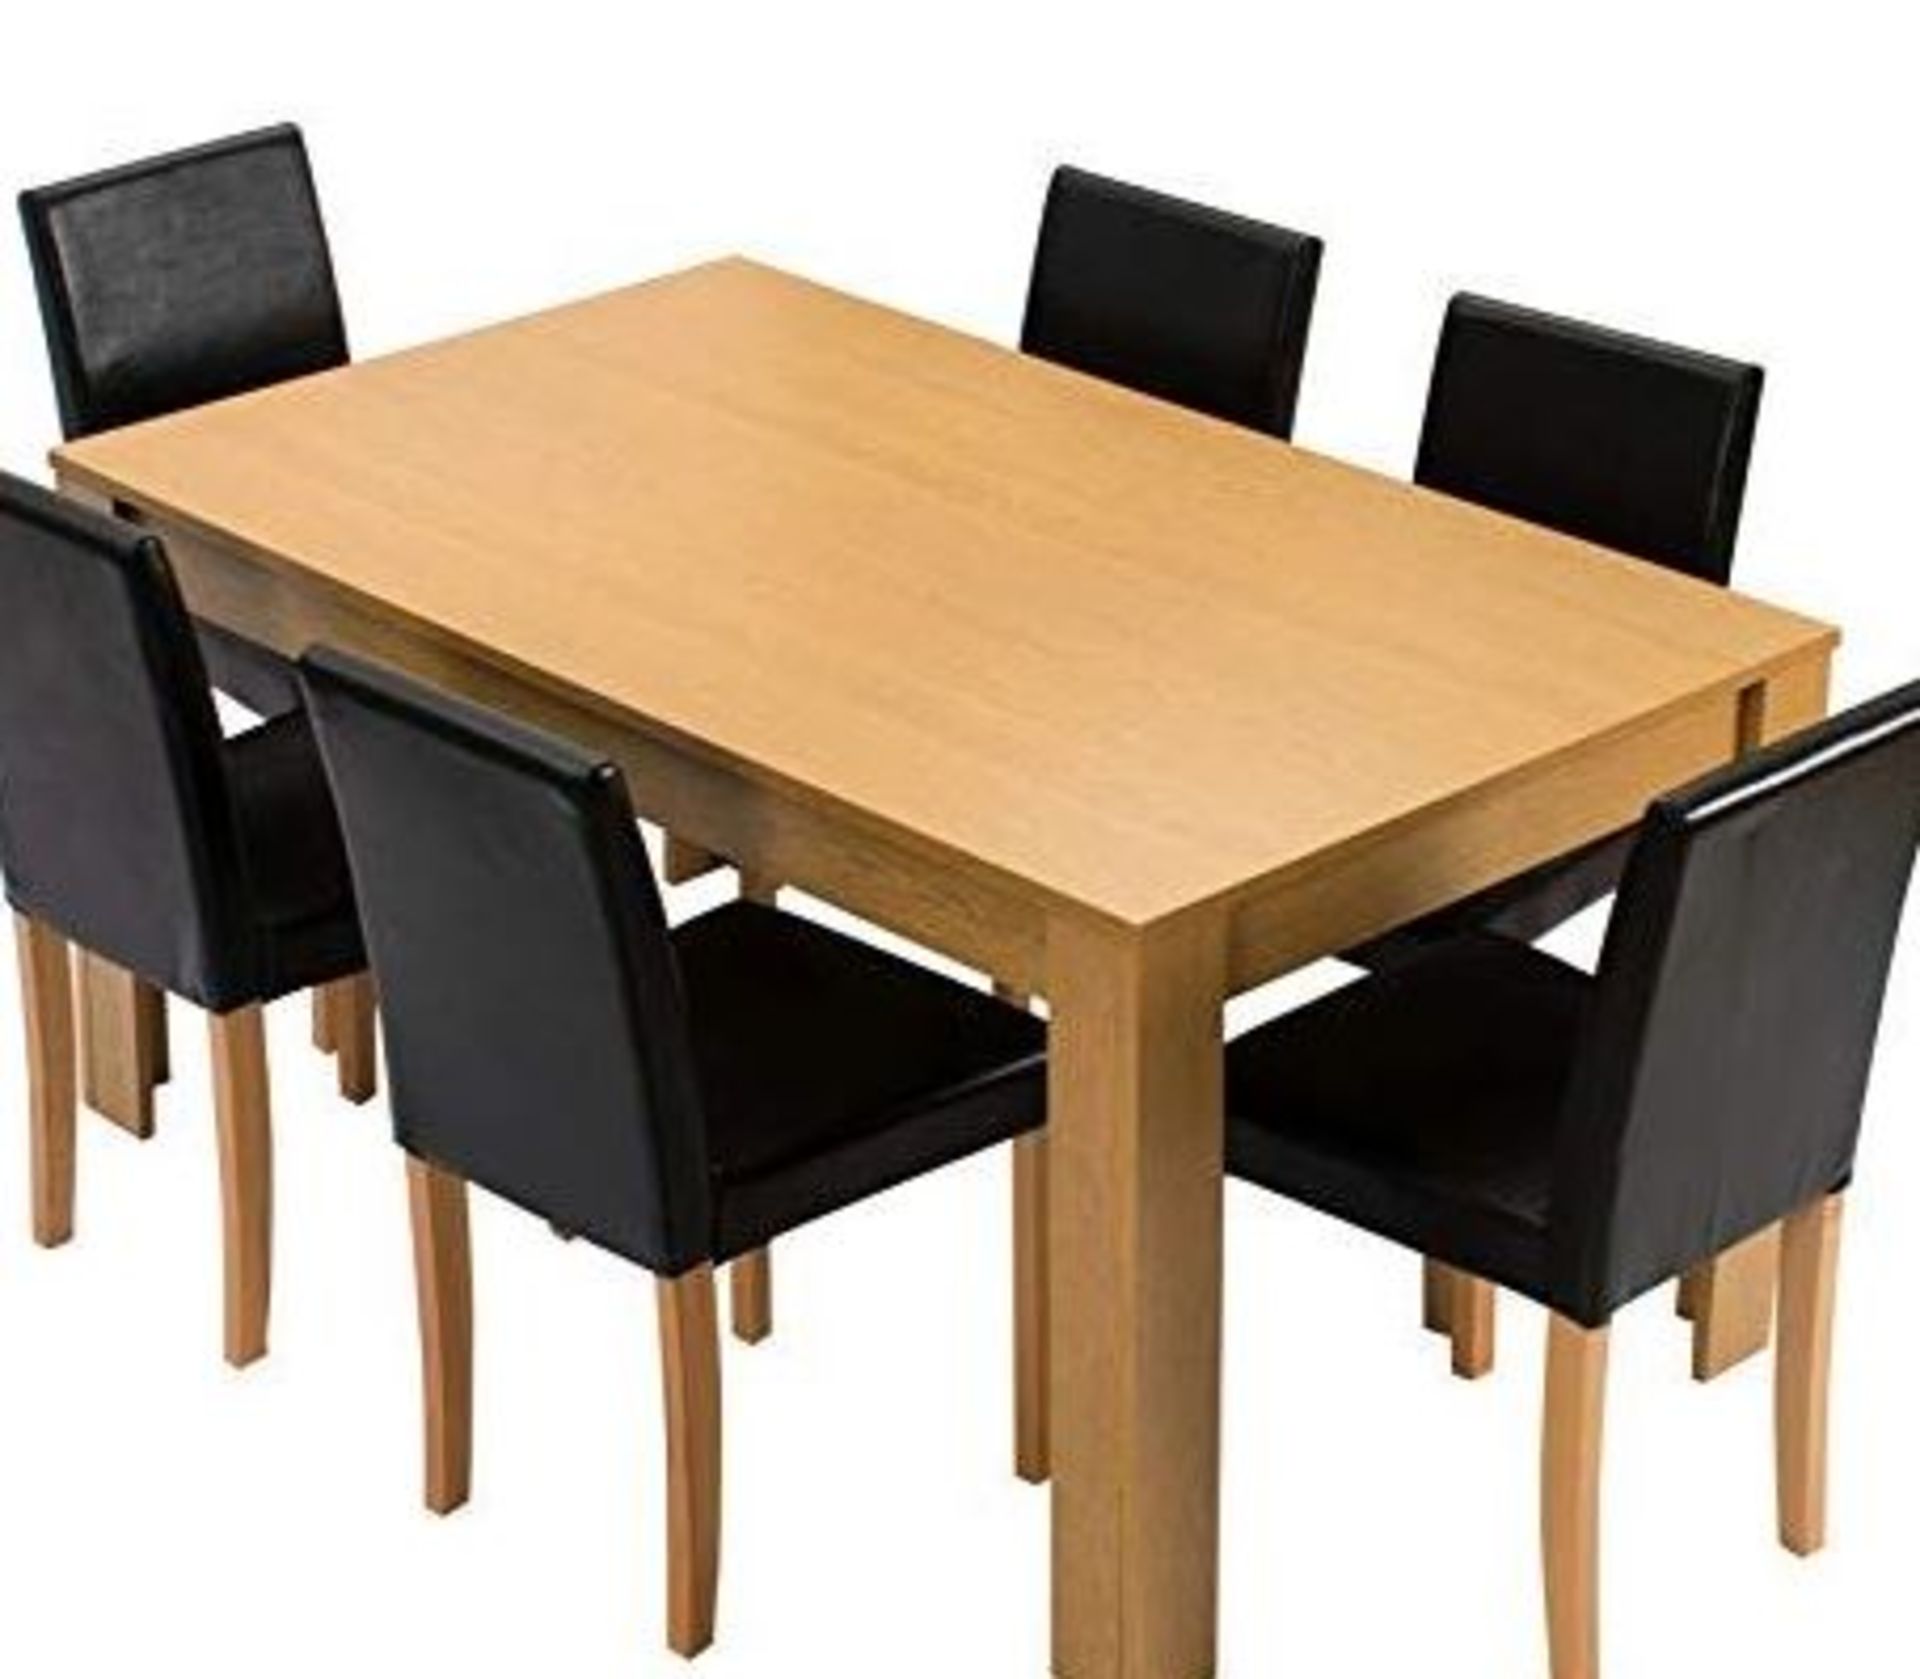 Boxed Luxury 6 Seater Oak Effect Dining Table. - SR5. RRP £329.99. Bring the family together. The